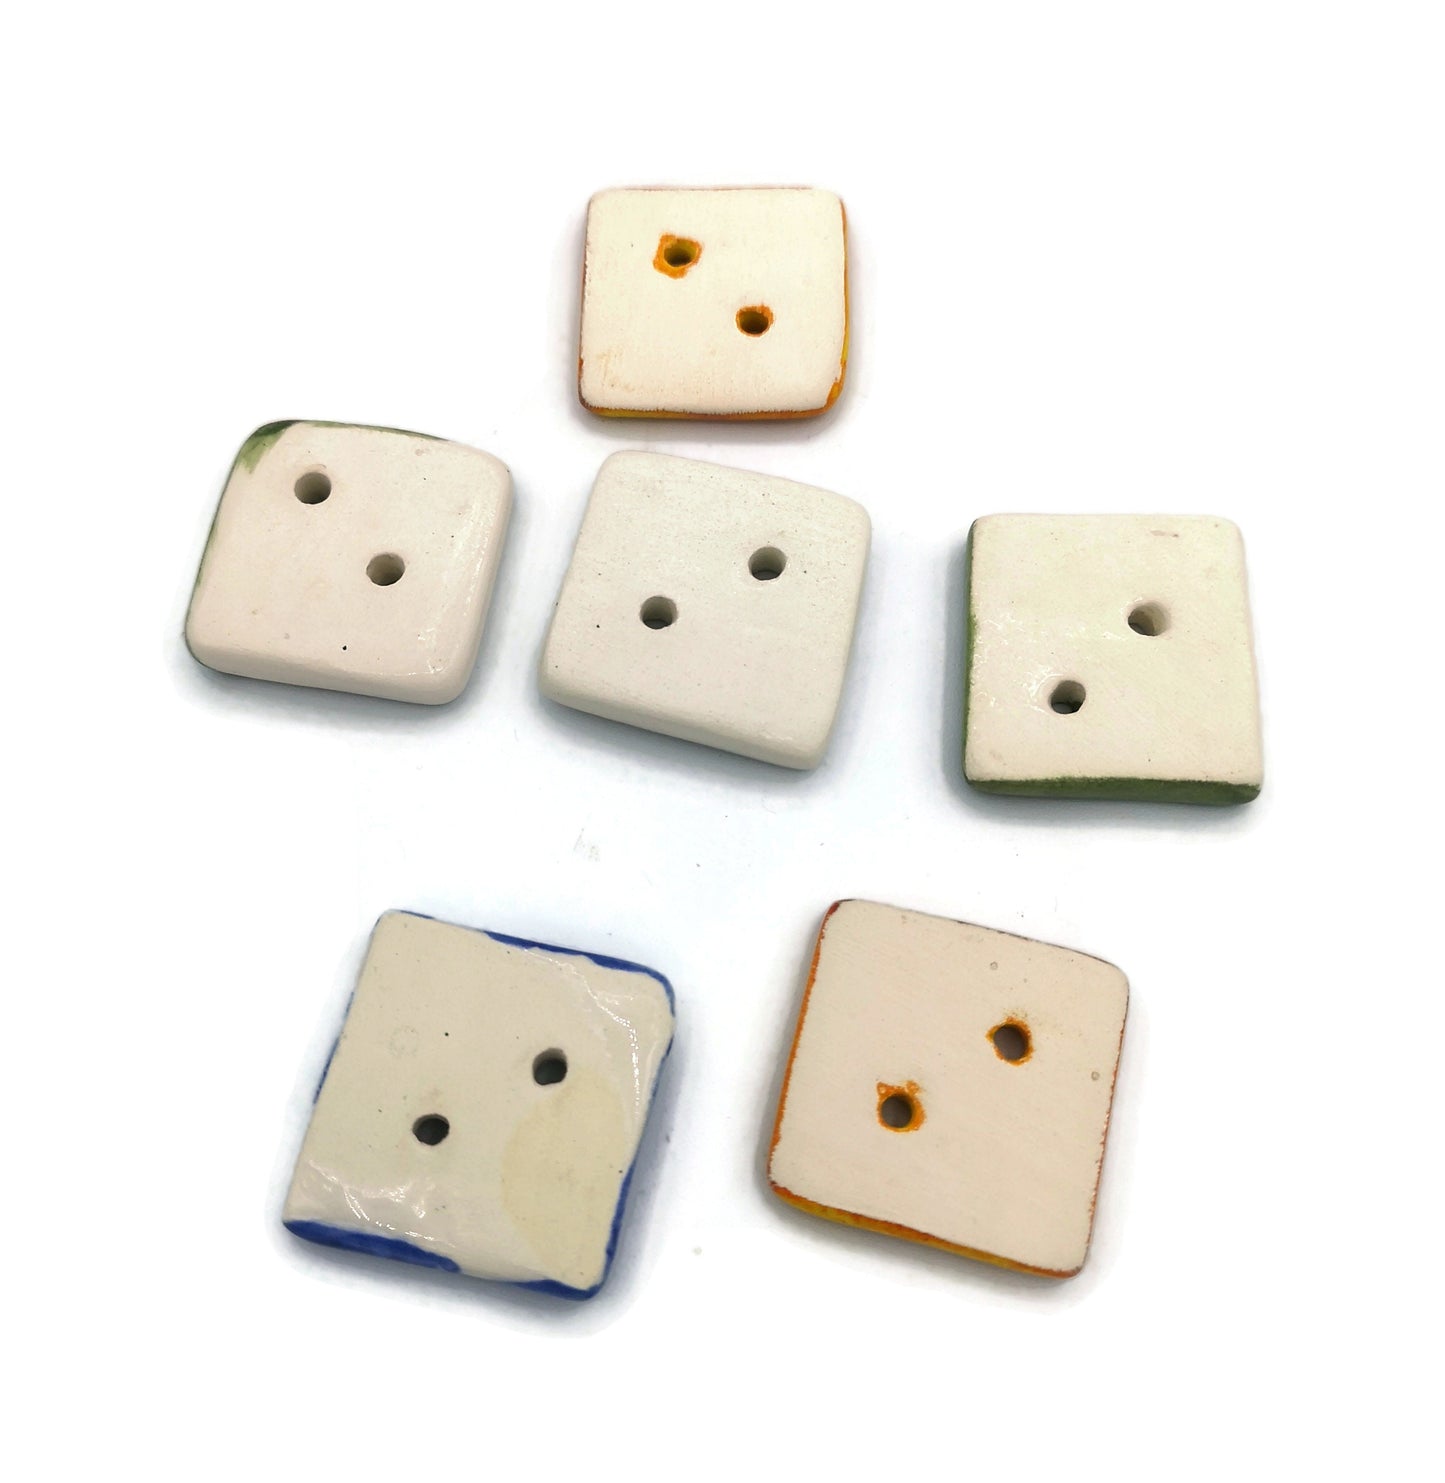 6Pc 30mm Extra Large Square Sewing Buttons For Crafts, Handmade Ceramic Sewing Supplies And Notions, Cute Strange And Unusual Hand Painted - Ceramica Ana Rafael